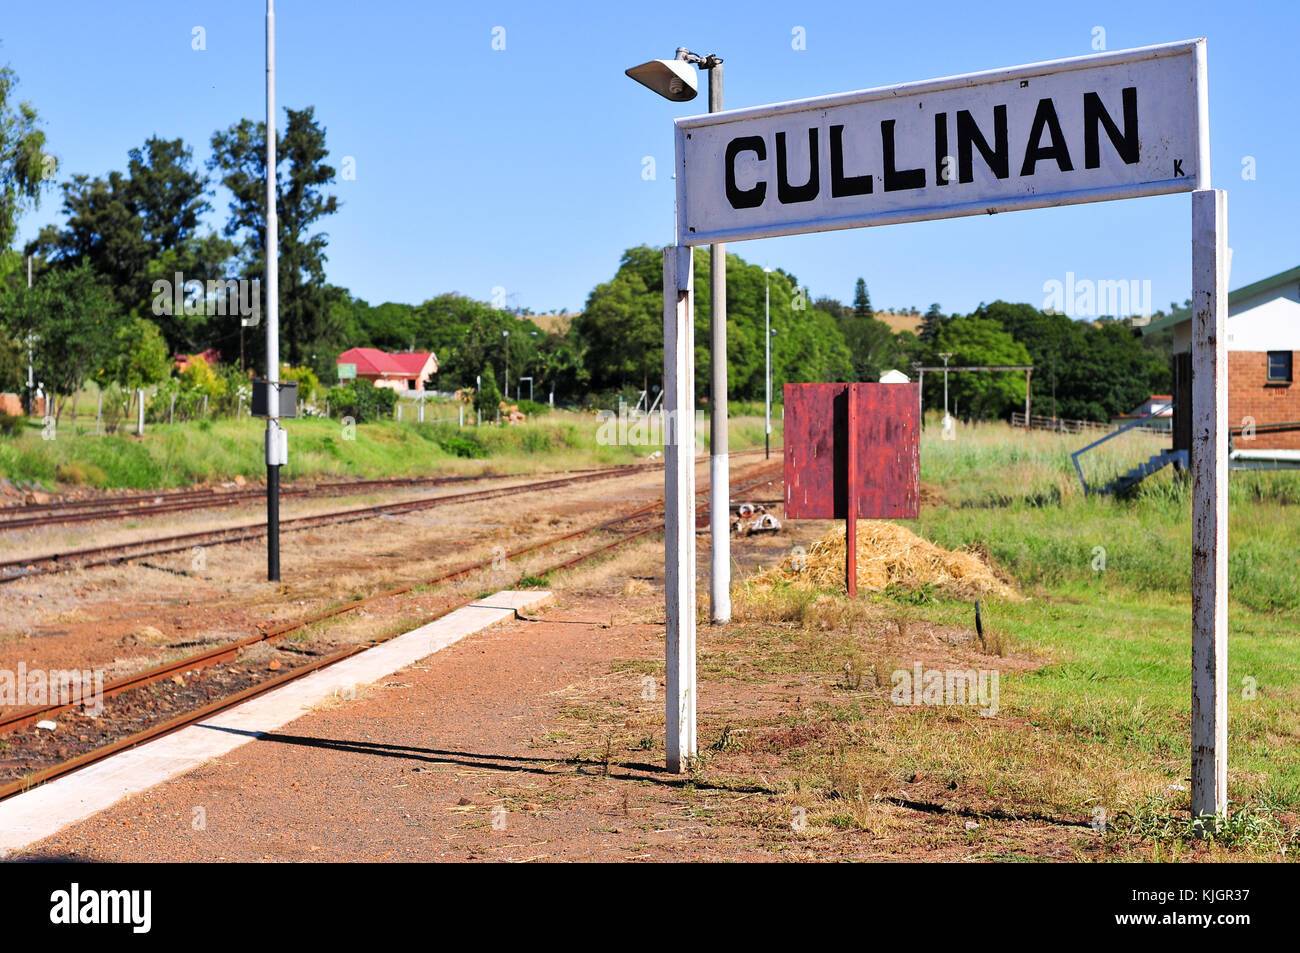 Railroad station serving the Cullinan Diamond Mine in South Africa. Stock Photo